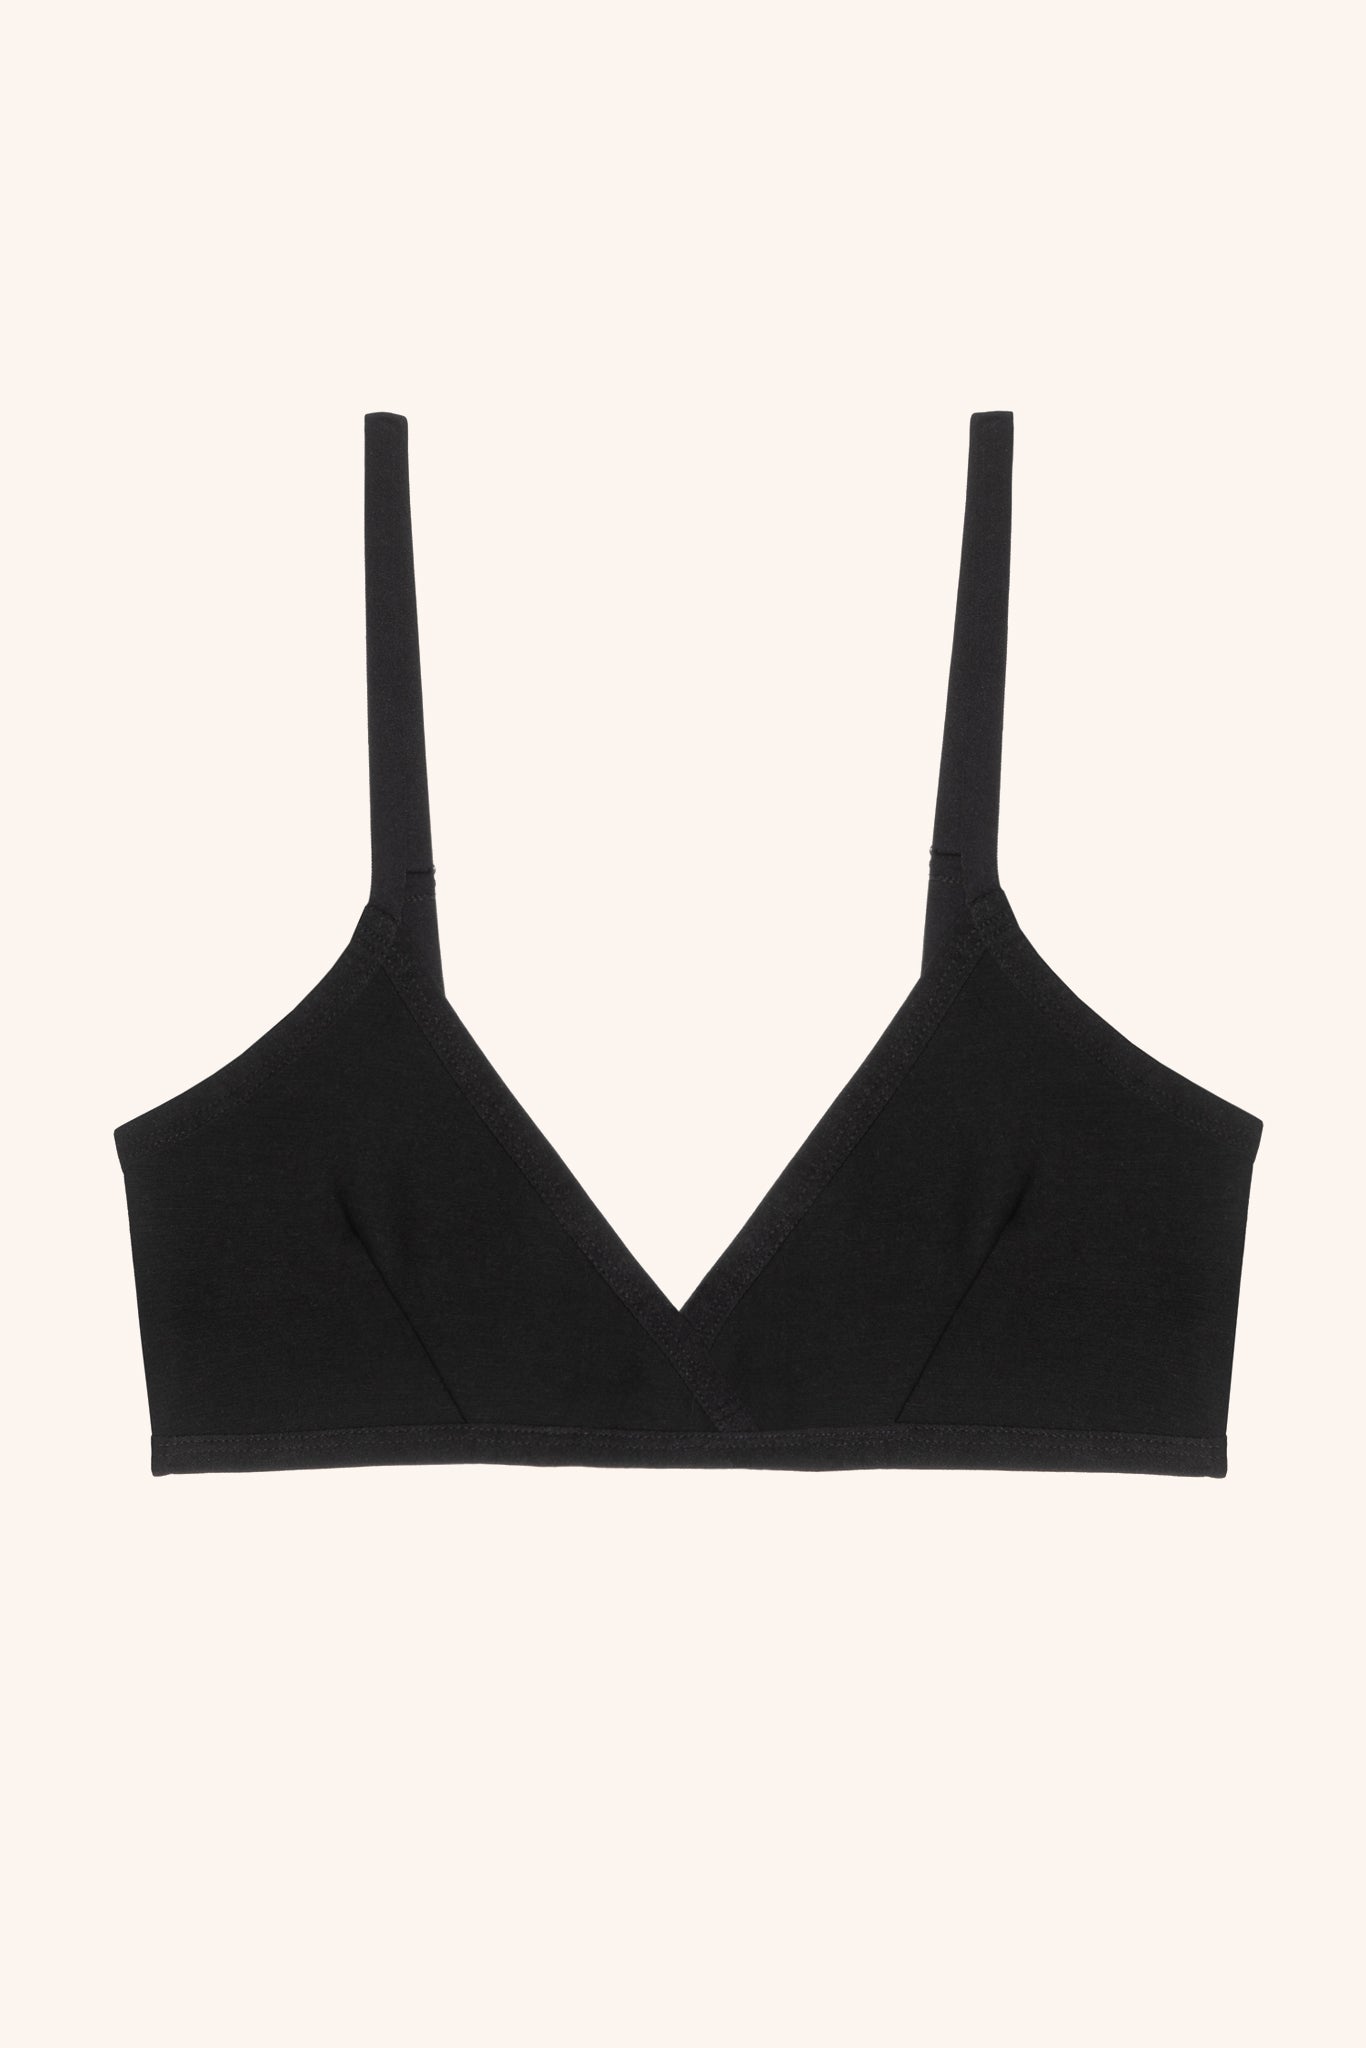 Modal and lace triangle bralette, Miiyu